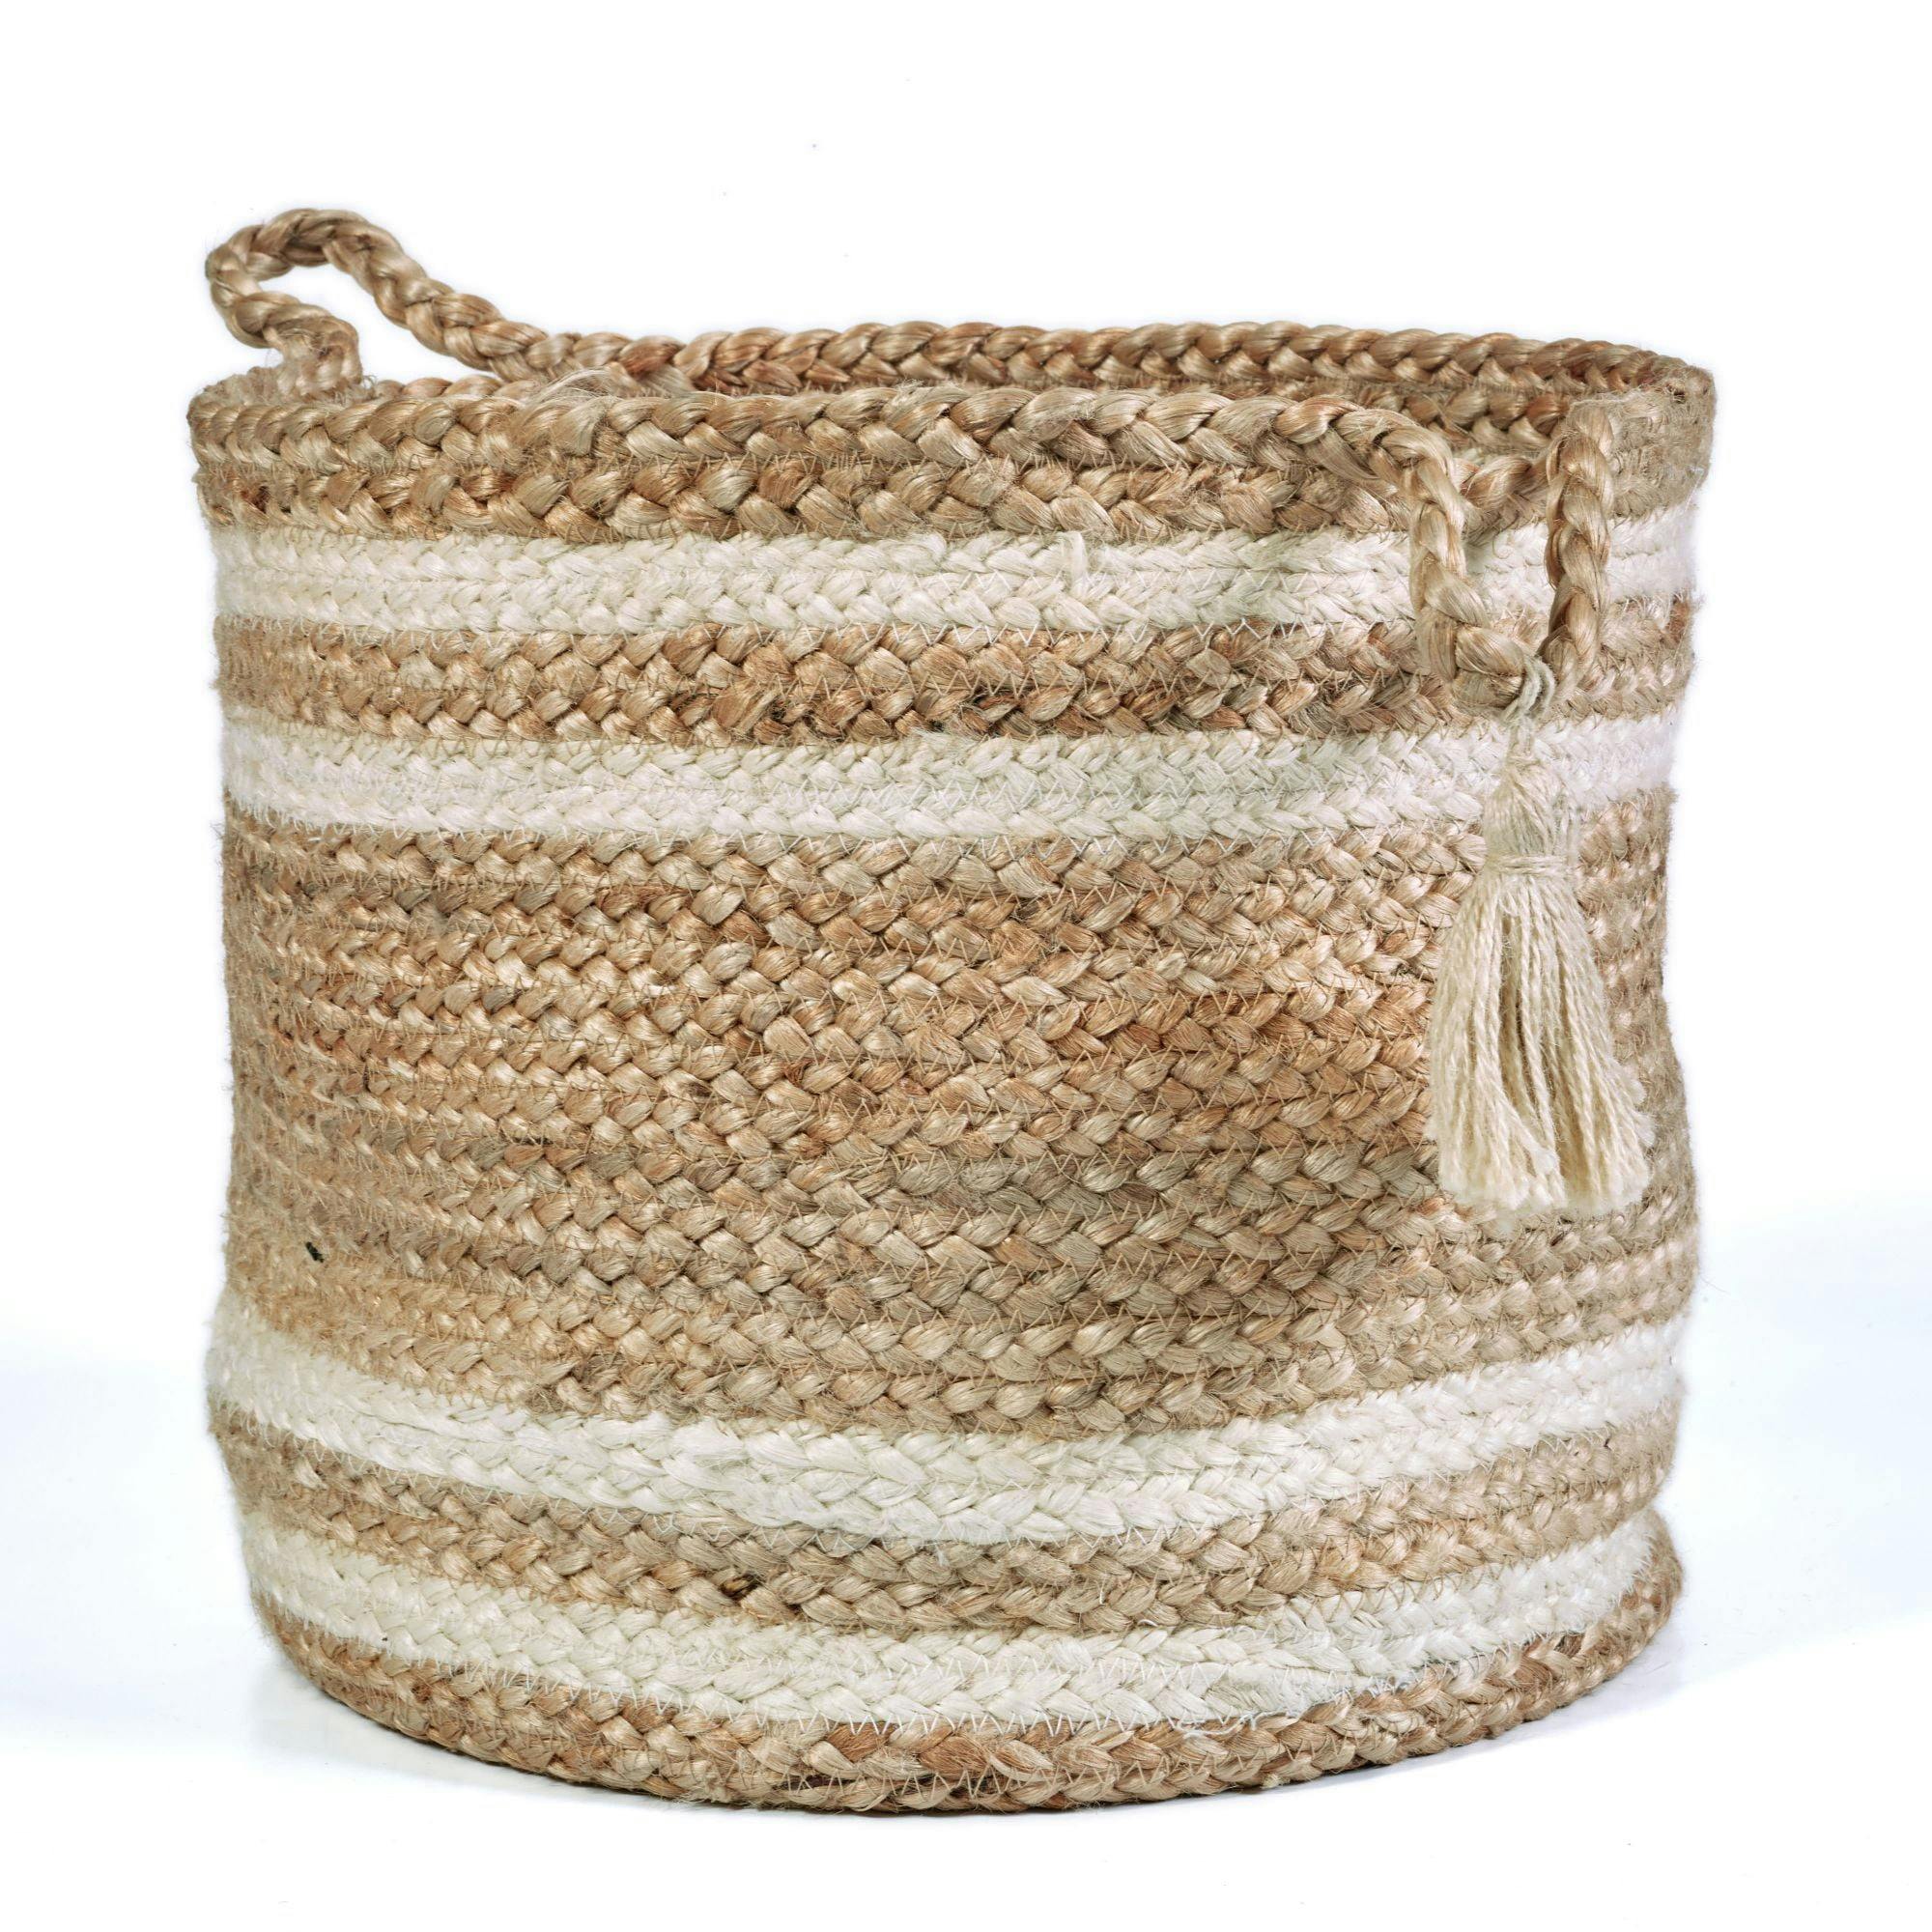 17" Brown and White Hand-Crafted Jute Storage Basket with Tassel